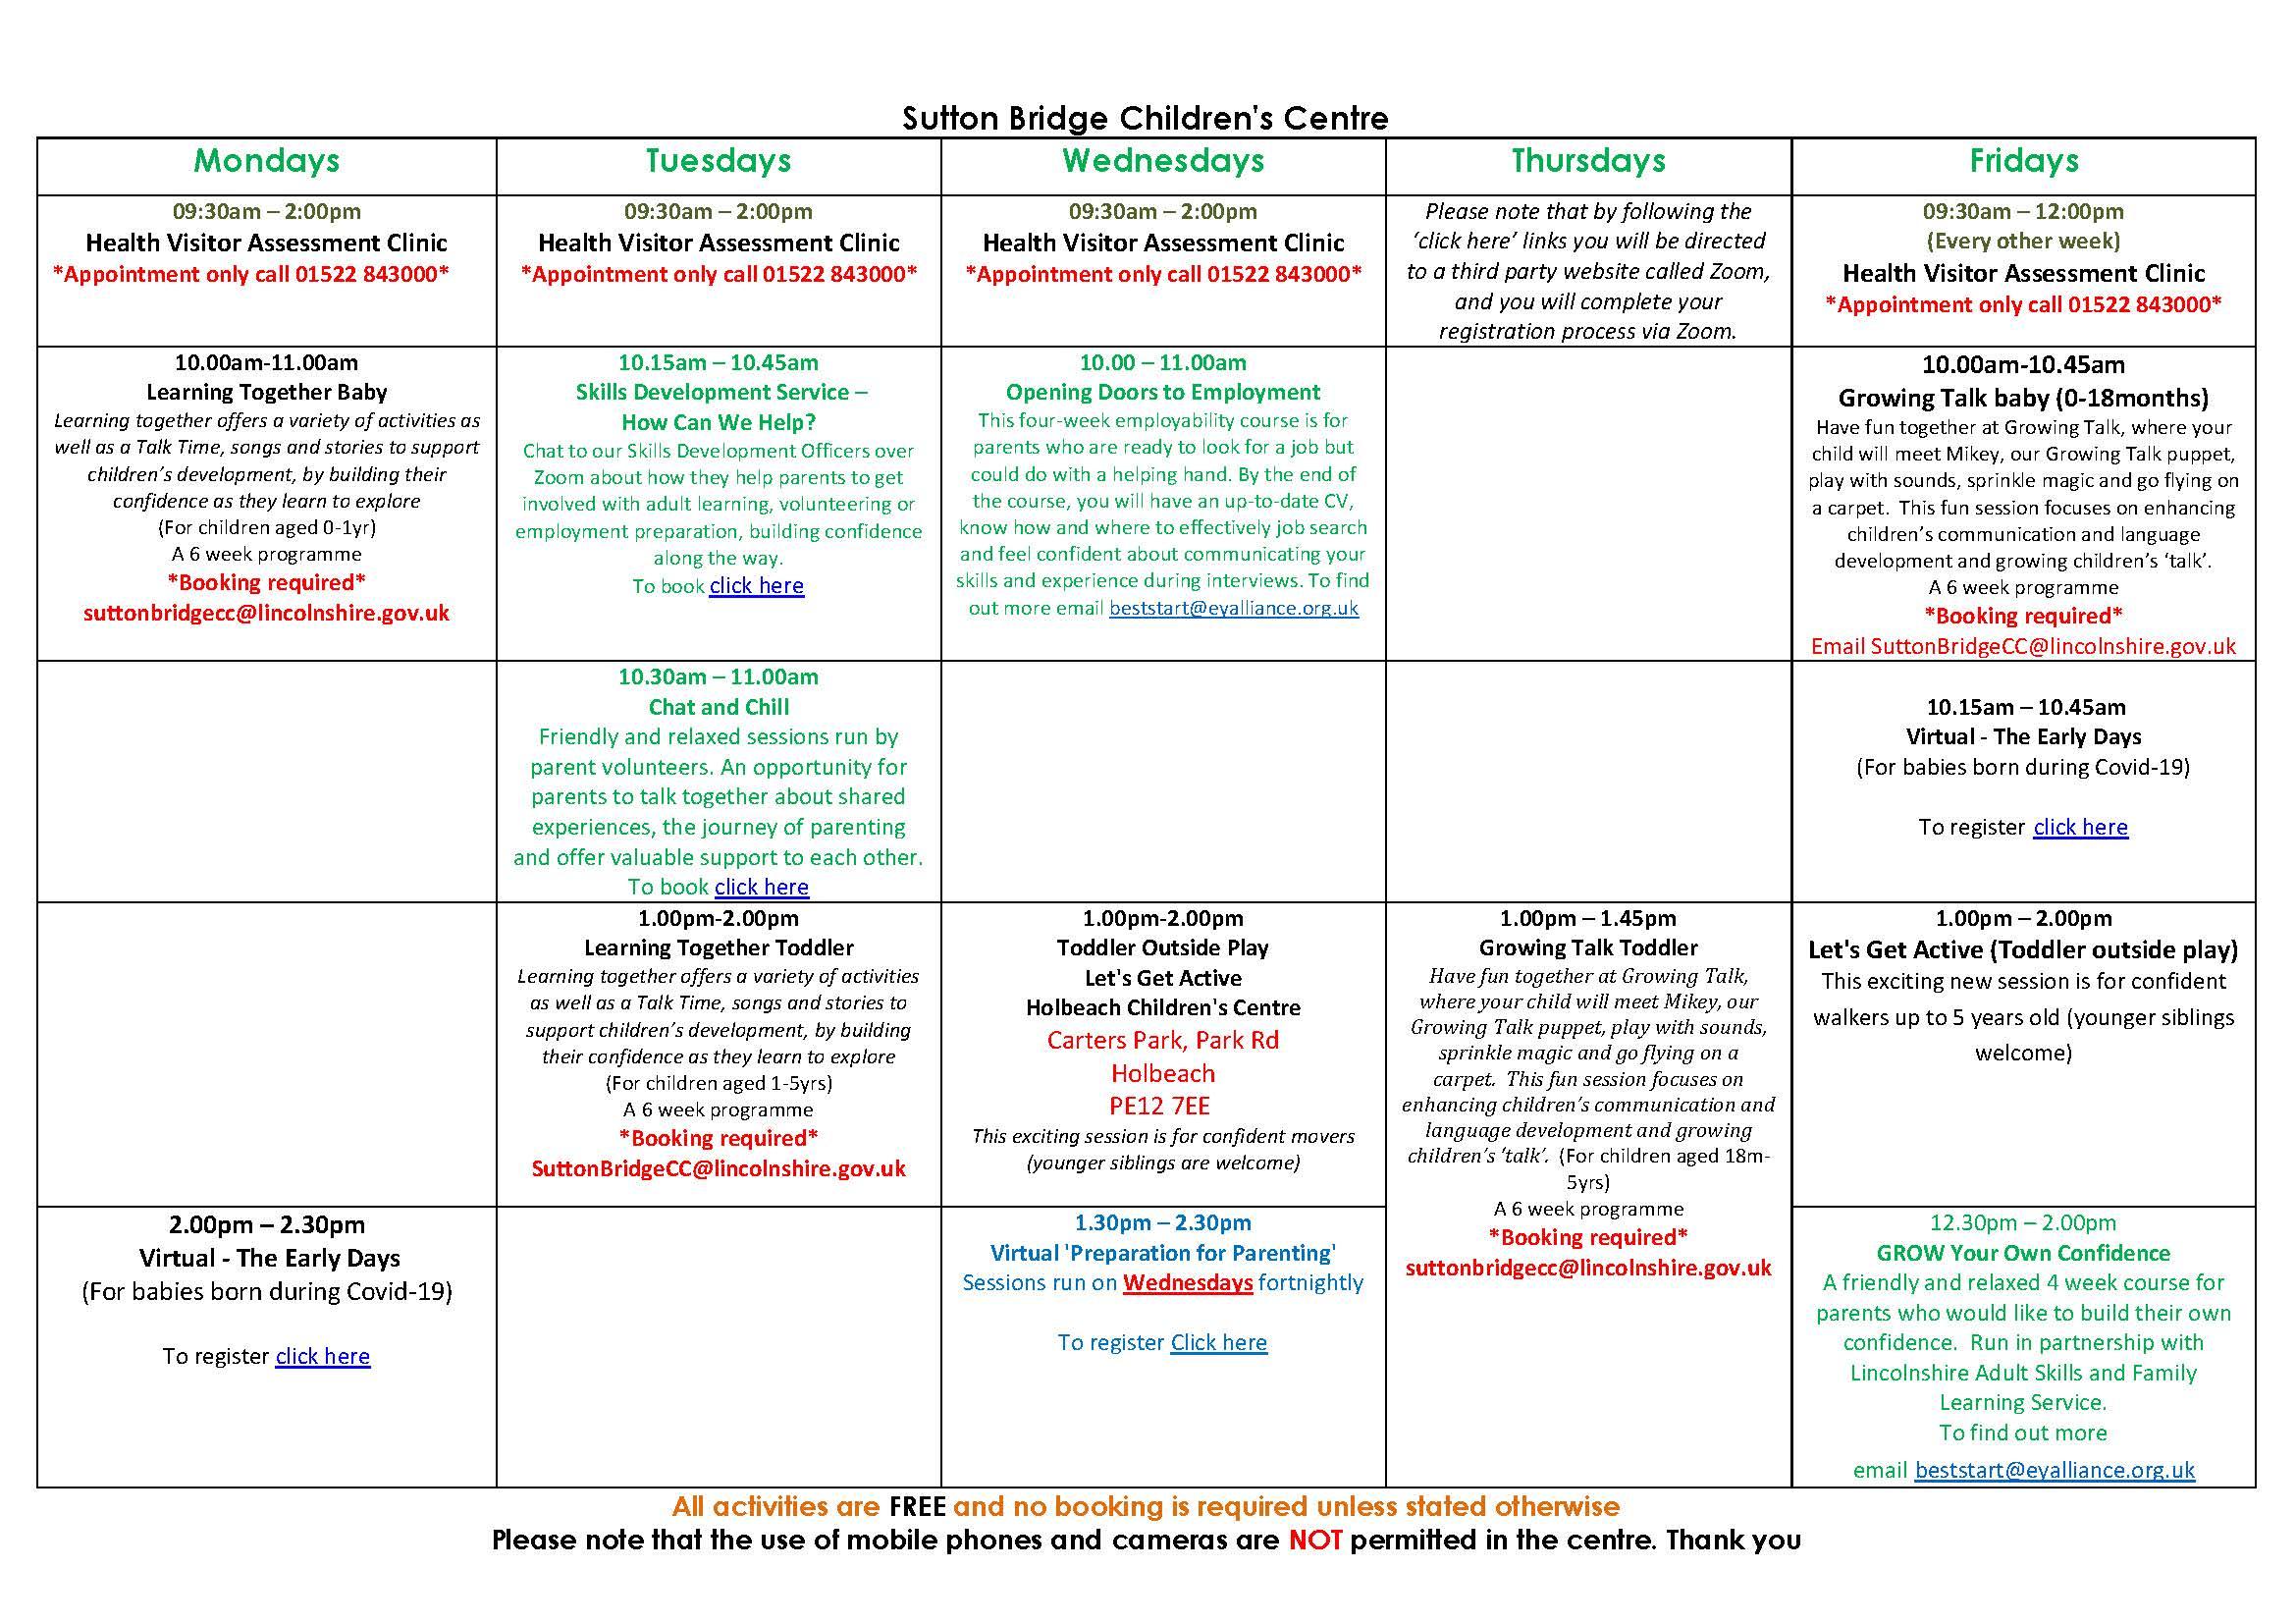 Sutton Bridge
Children’s Centre
WHAT'S ON GUIDE
From 6th September 2021
Timetable